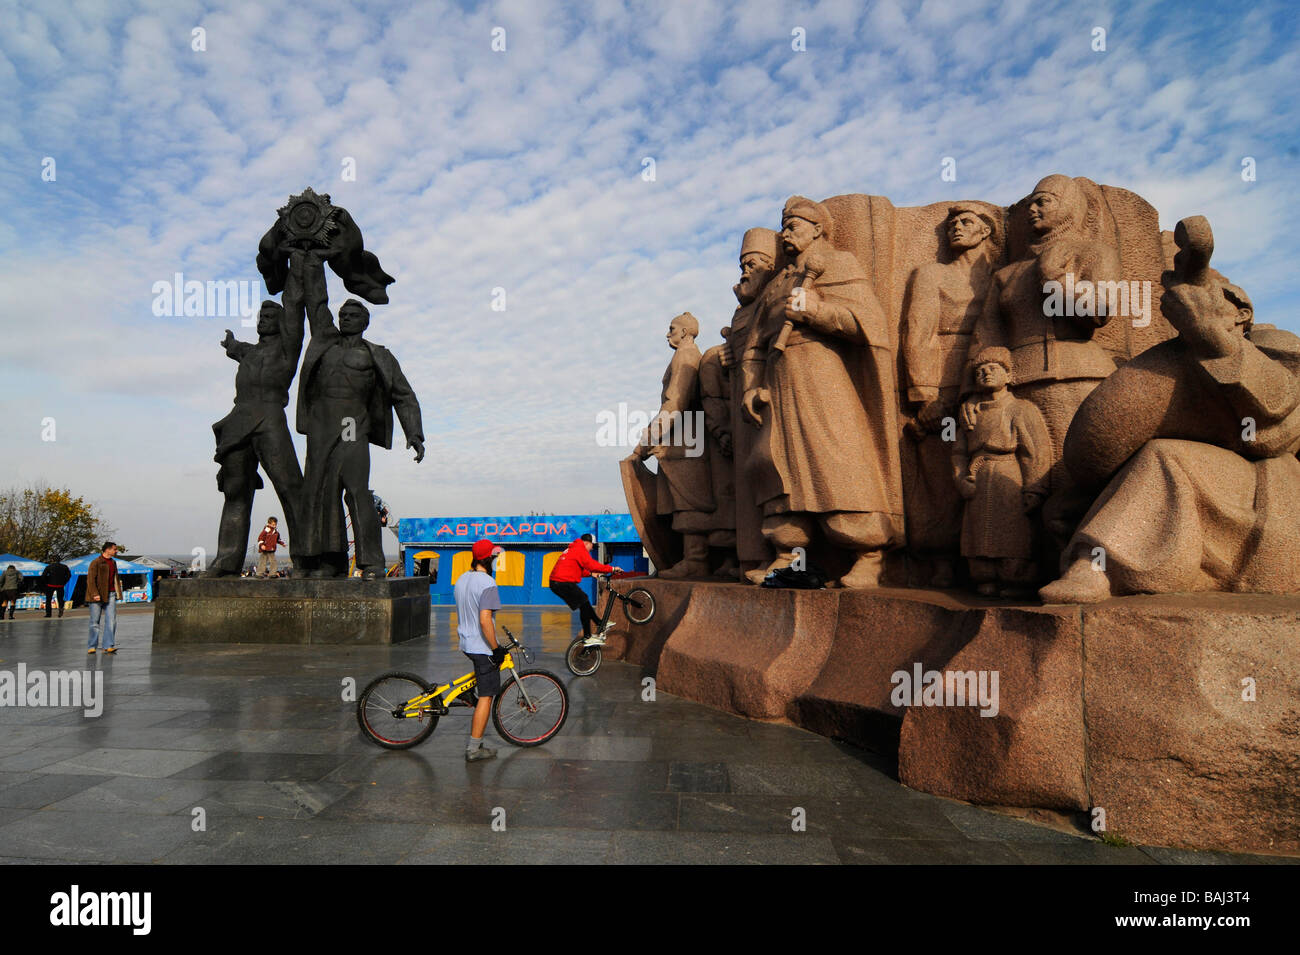 The 'friendship of nations' monument in Kiev celebrating the friendship of Russian and Ukraine during the Soviet Union era. Stock Photo